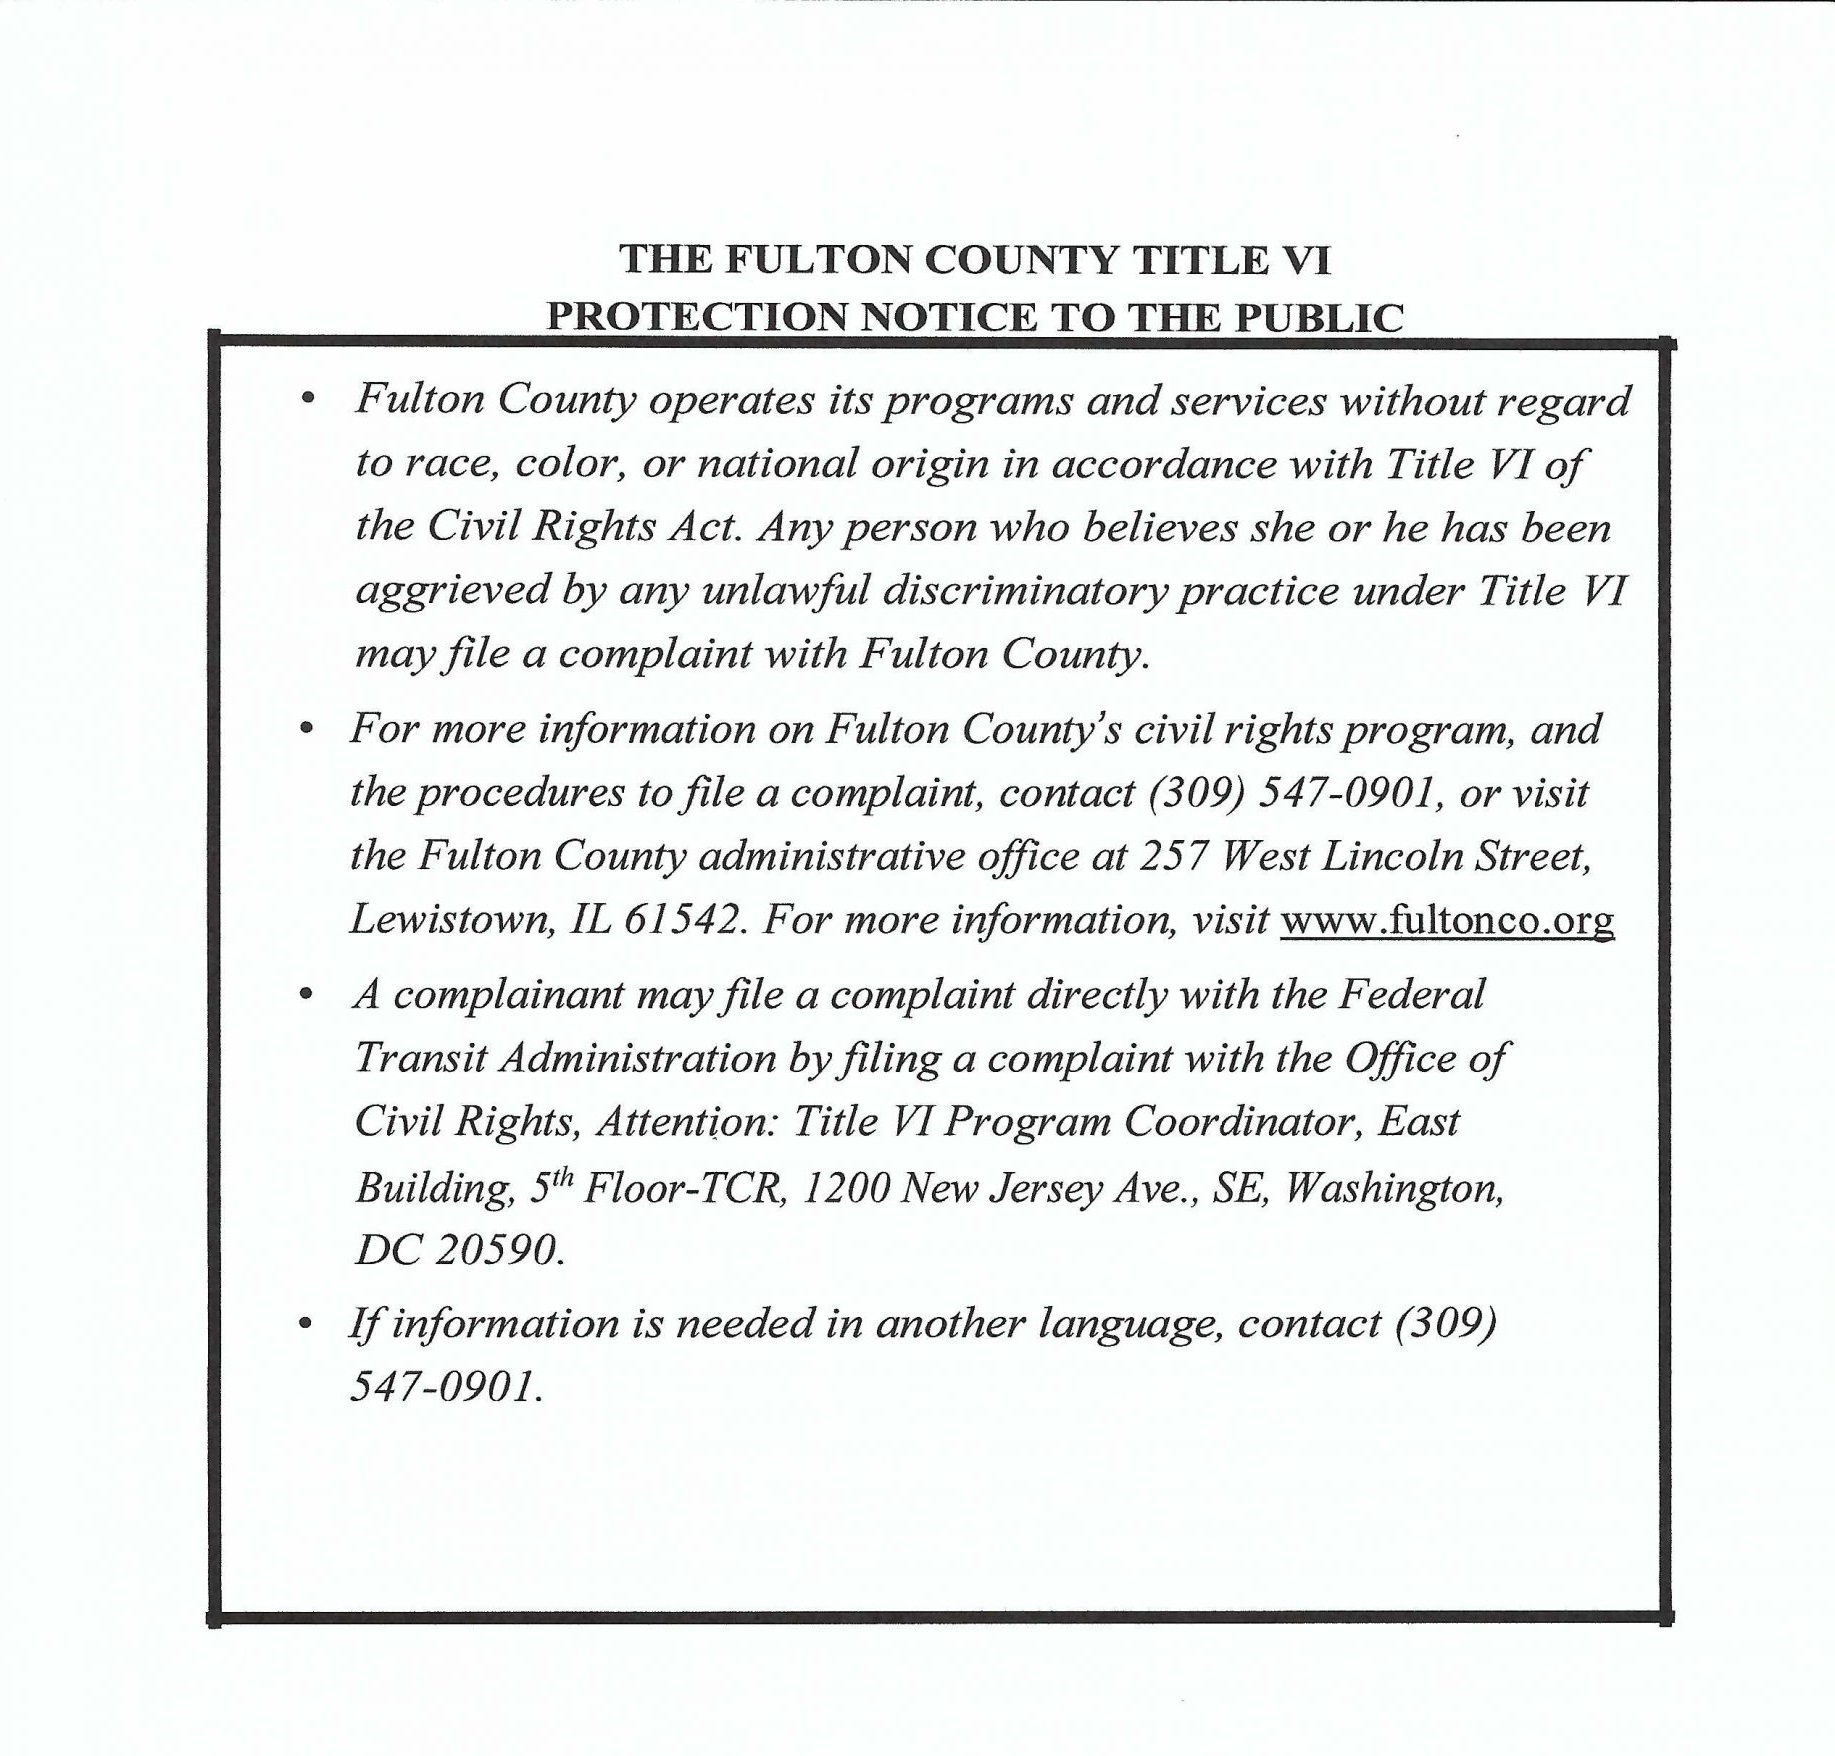 Fulton County Title VI Protection Notice to the Public